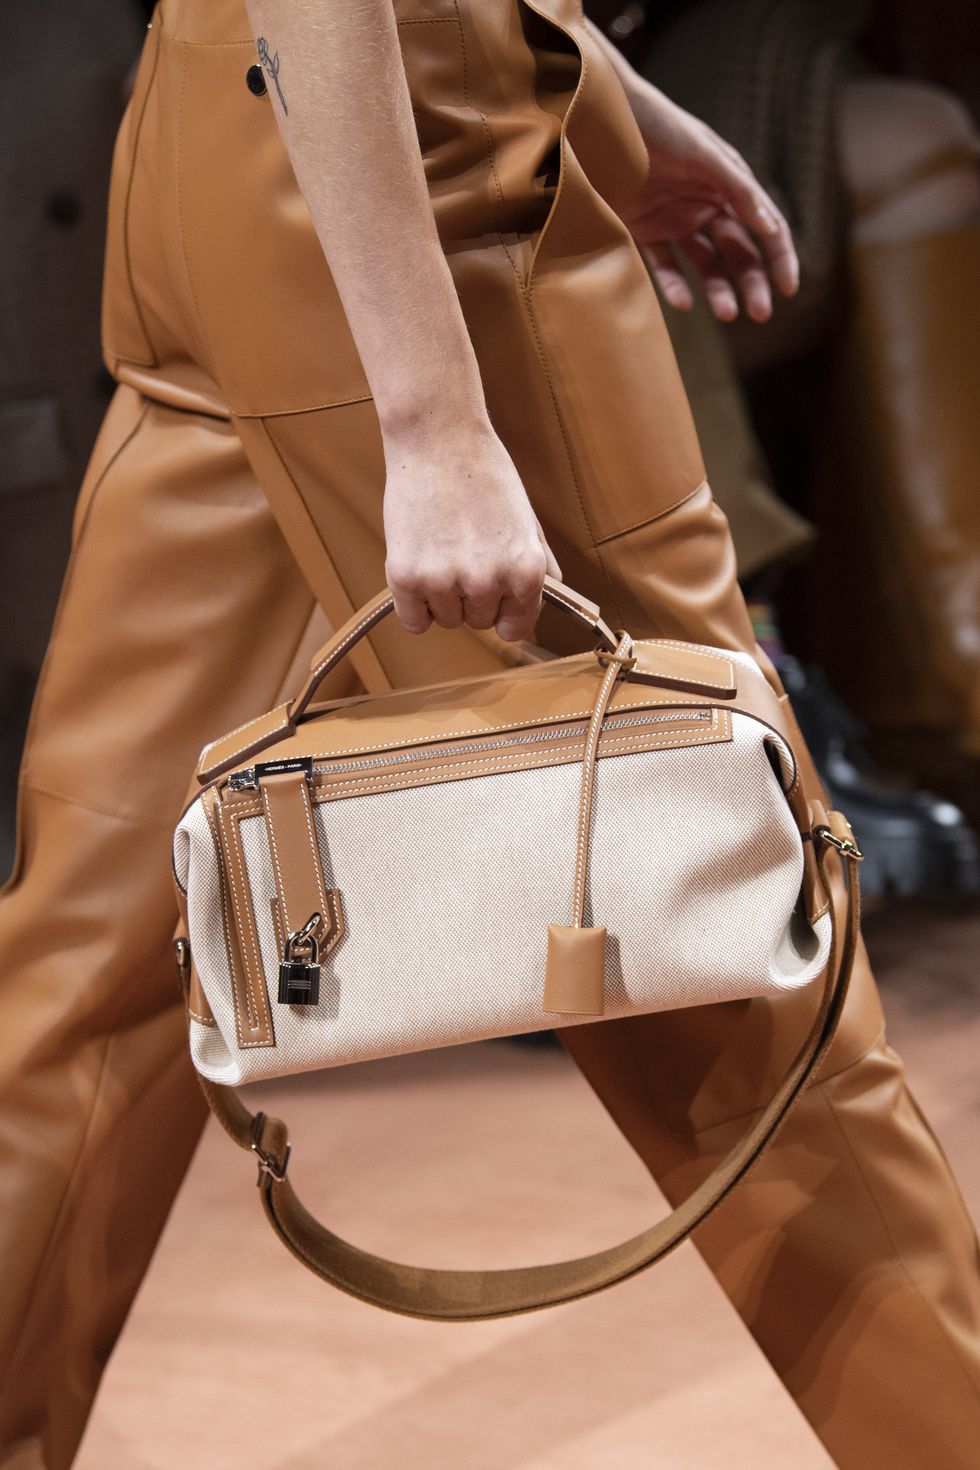 New Stylish Leather Handbags for Girls trending in Fashion 2020